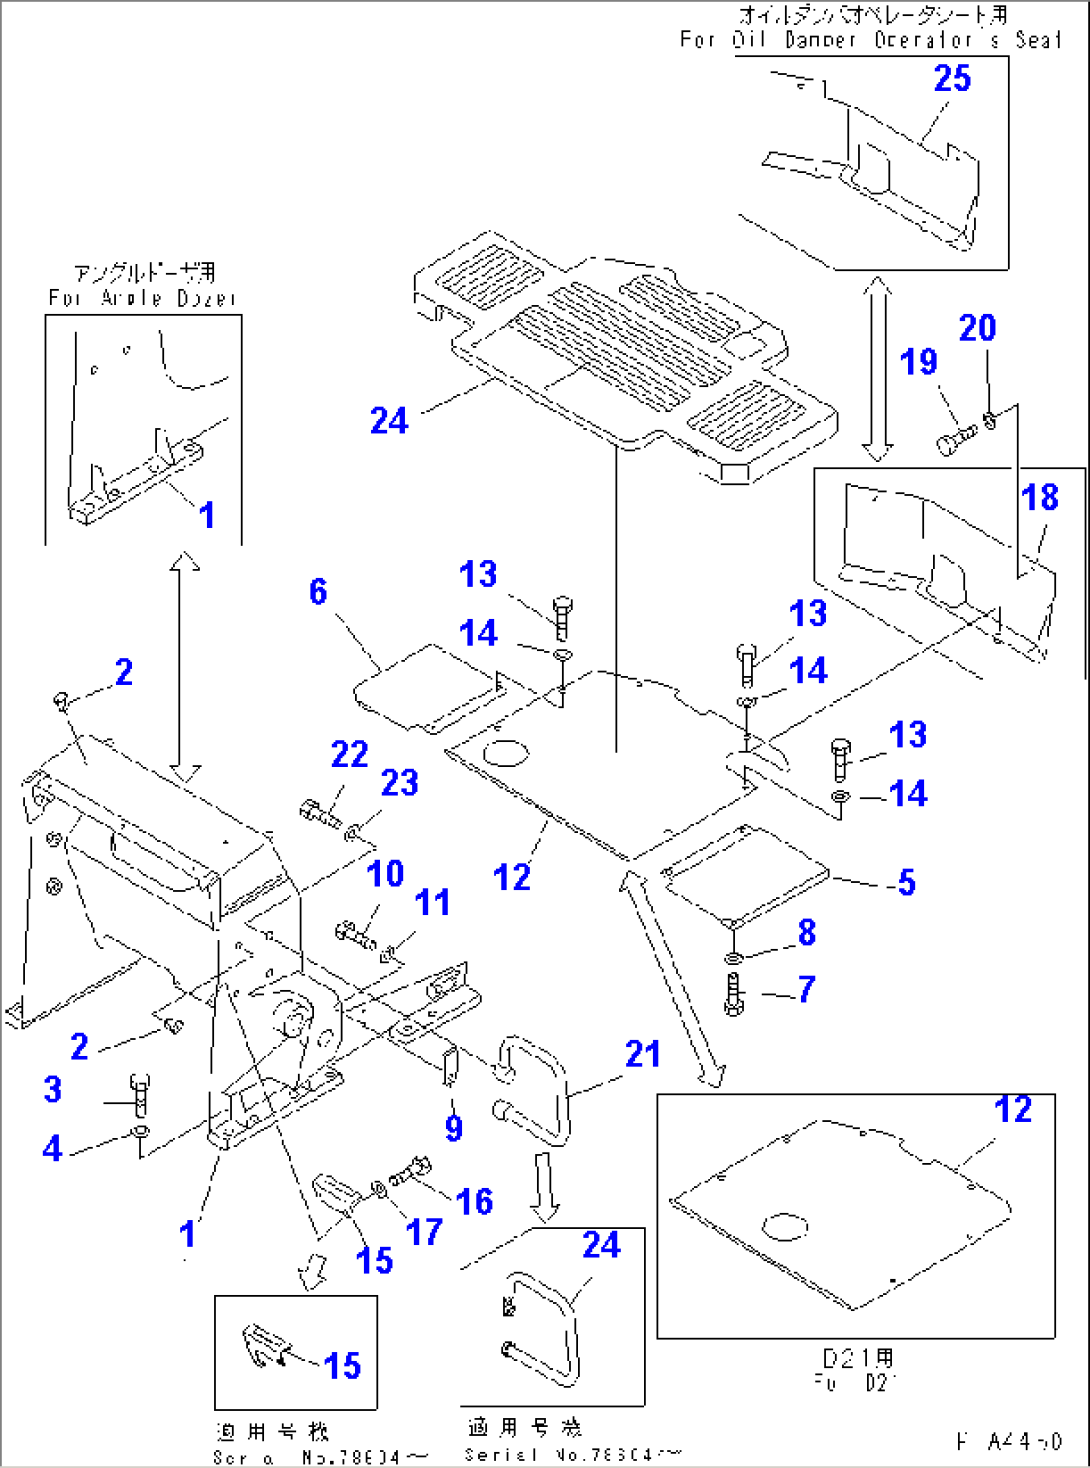 LOADER FRAME AND FLOOR PLATE (FOR TWO LEVERS STEERING)